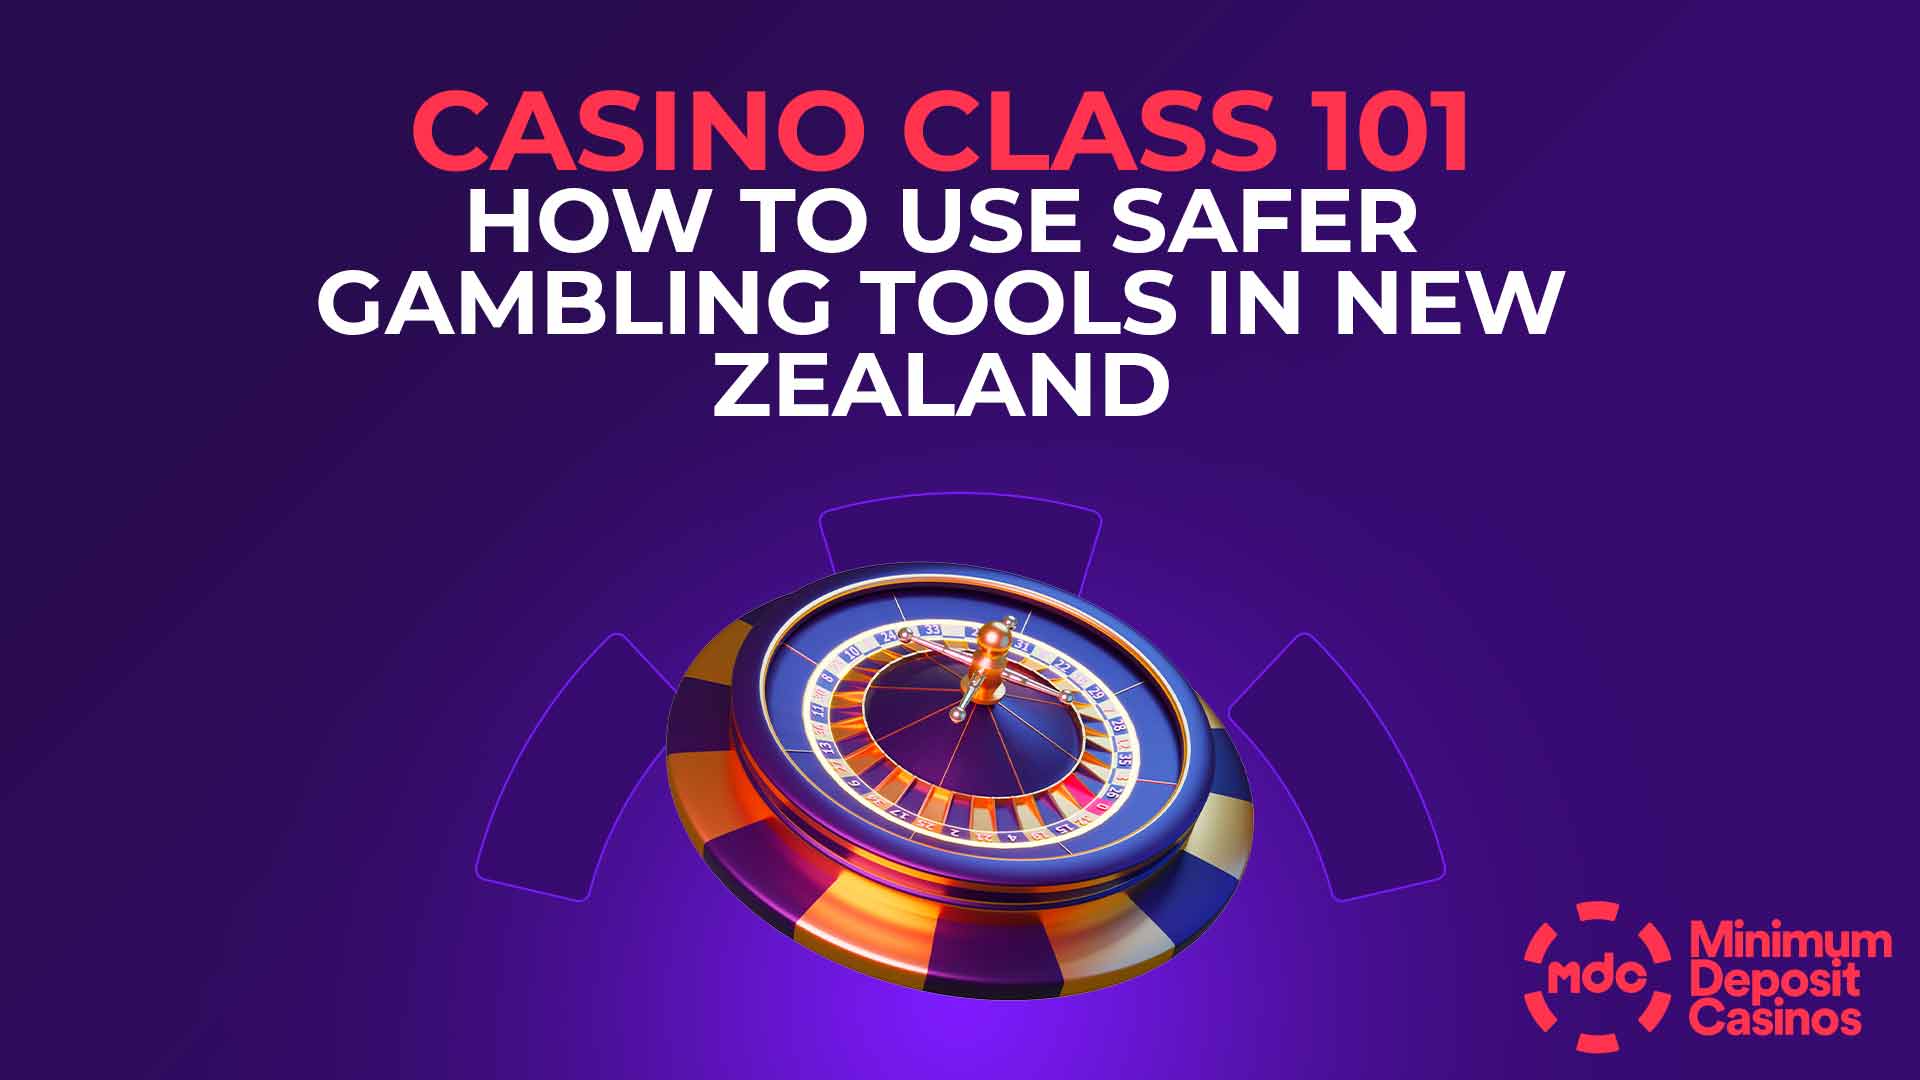 Casino Class 101 how to use safer gambling tools in NZ